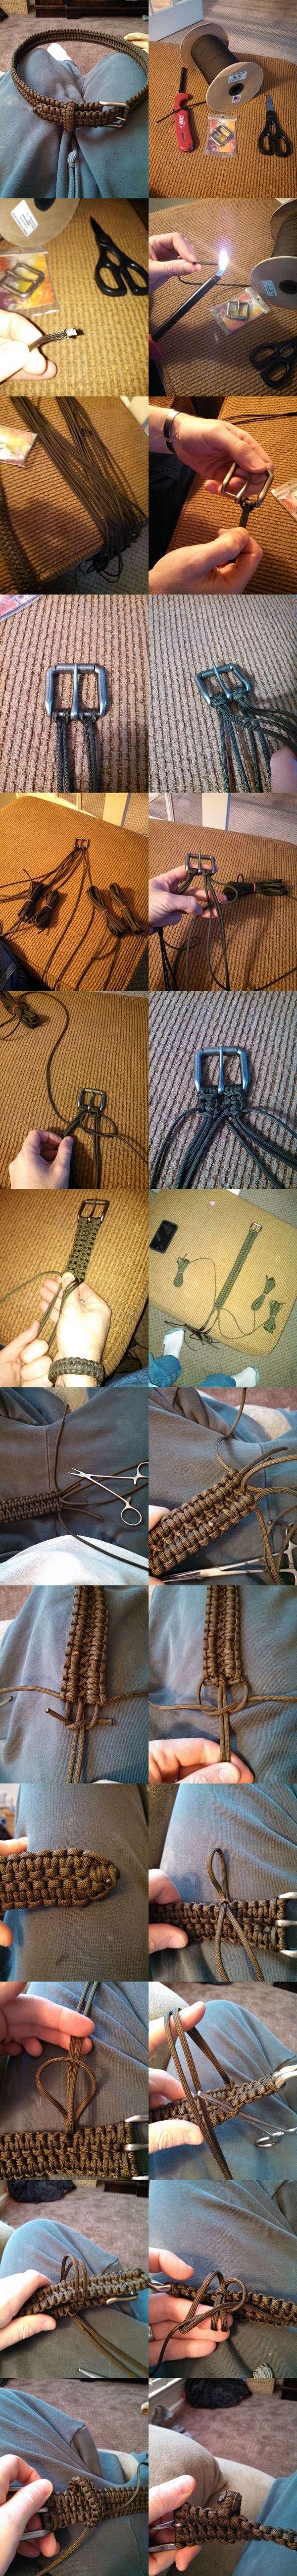 diy-paracord-projects-useful-daily-life